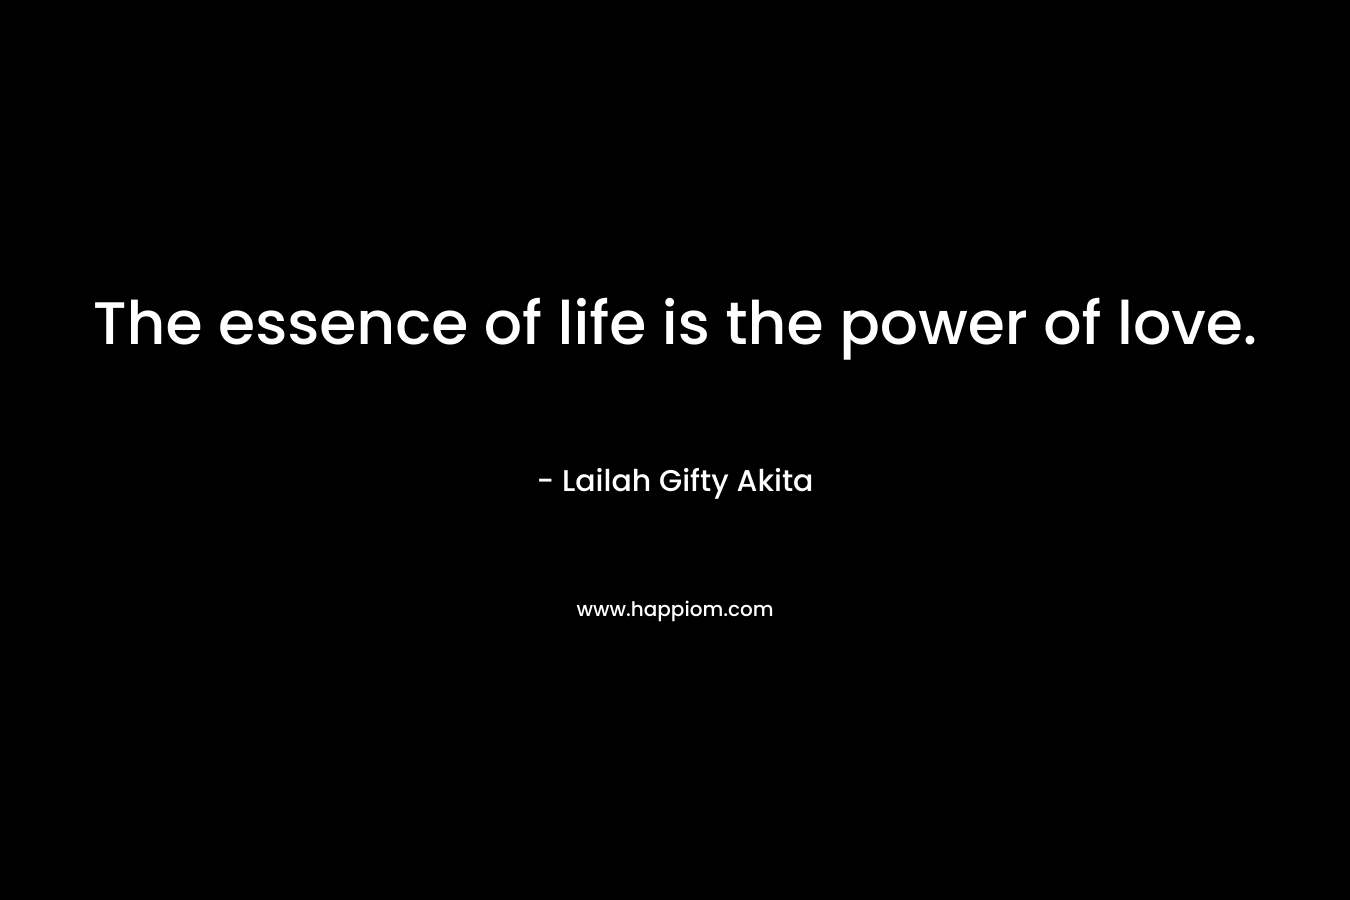 The essence of life is the power of love.